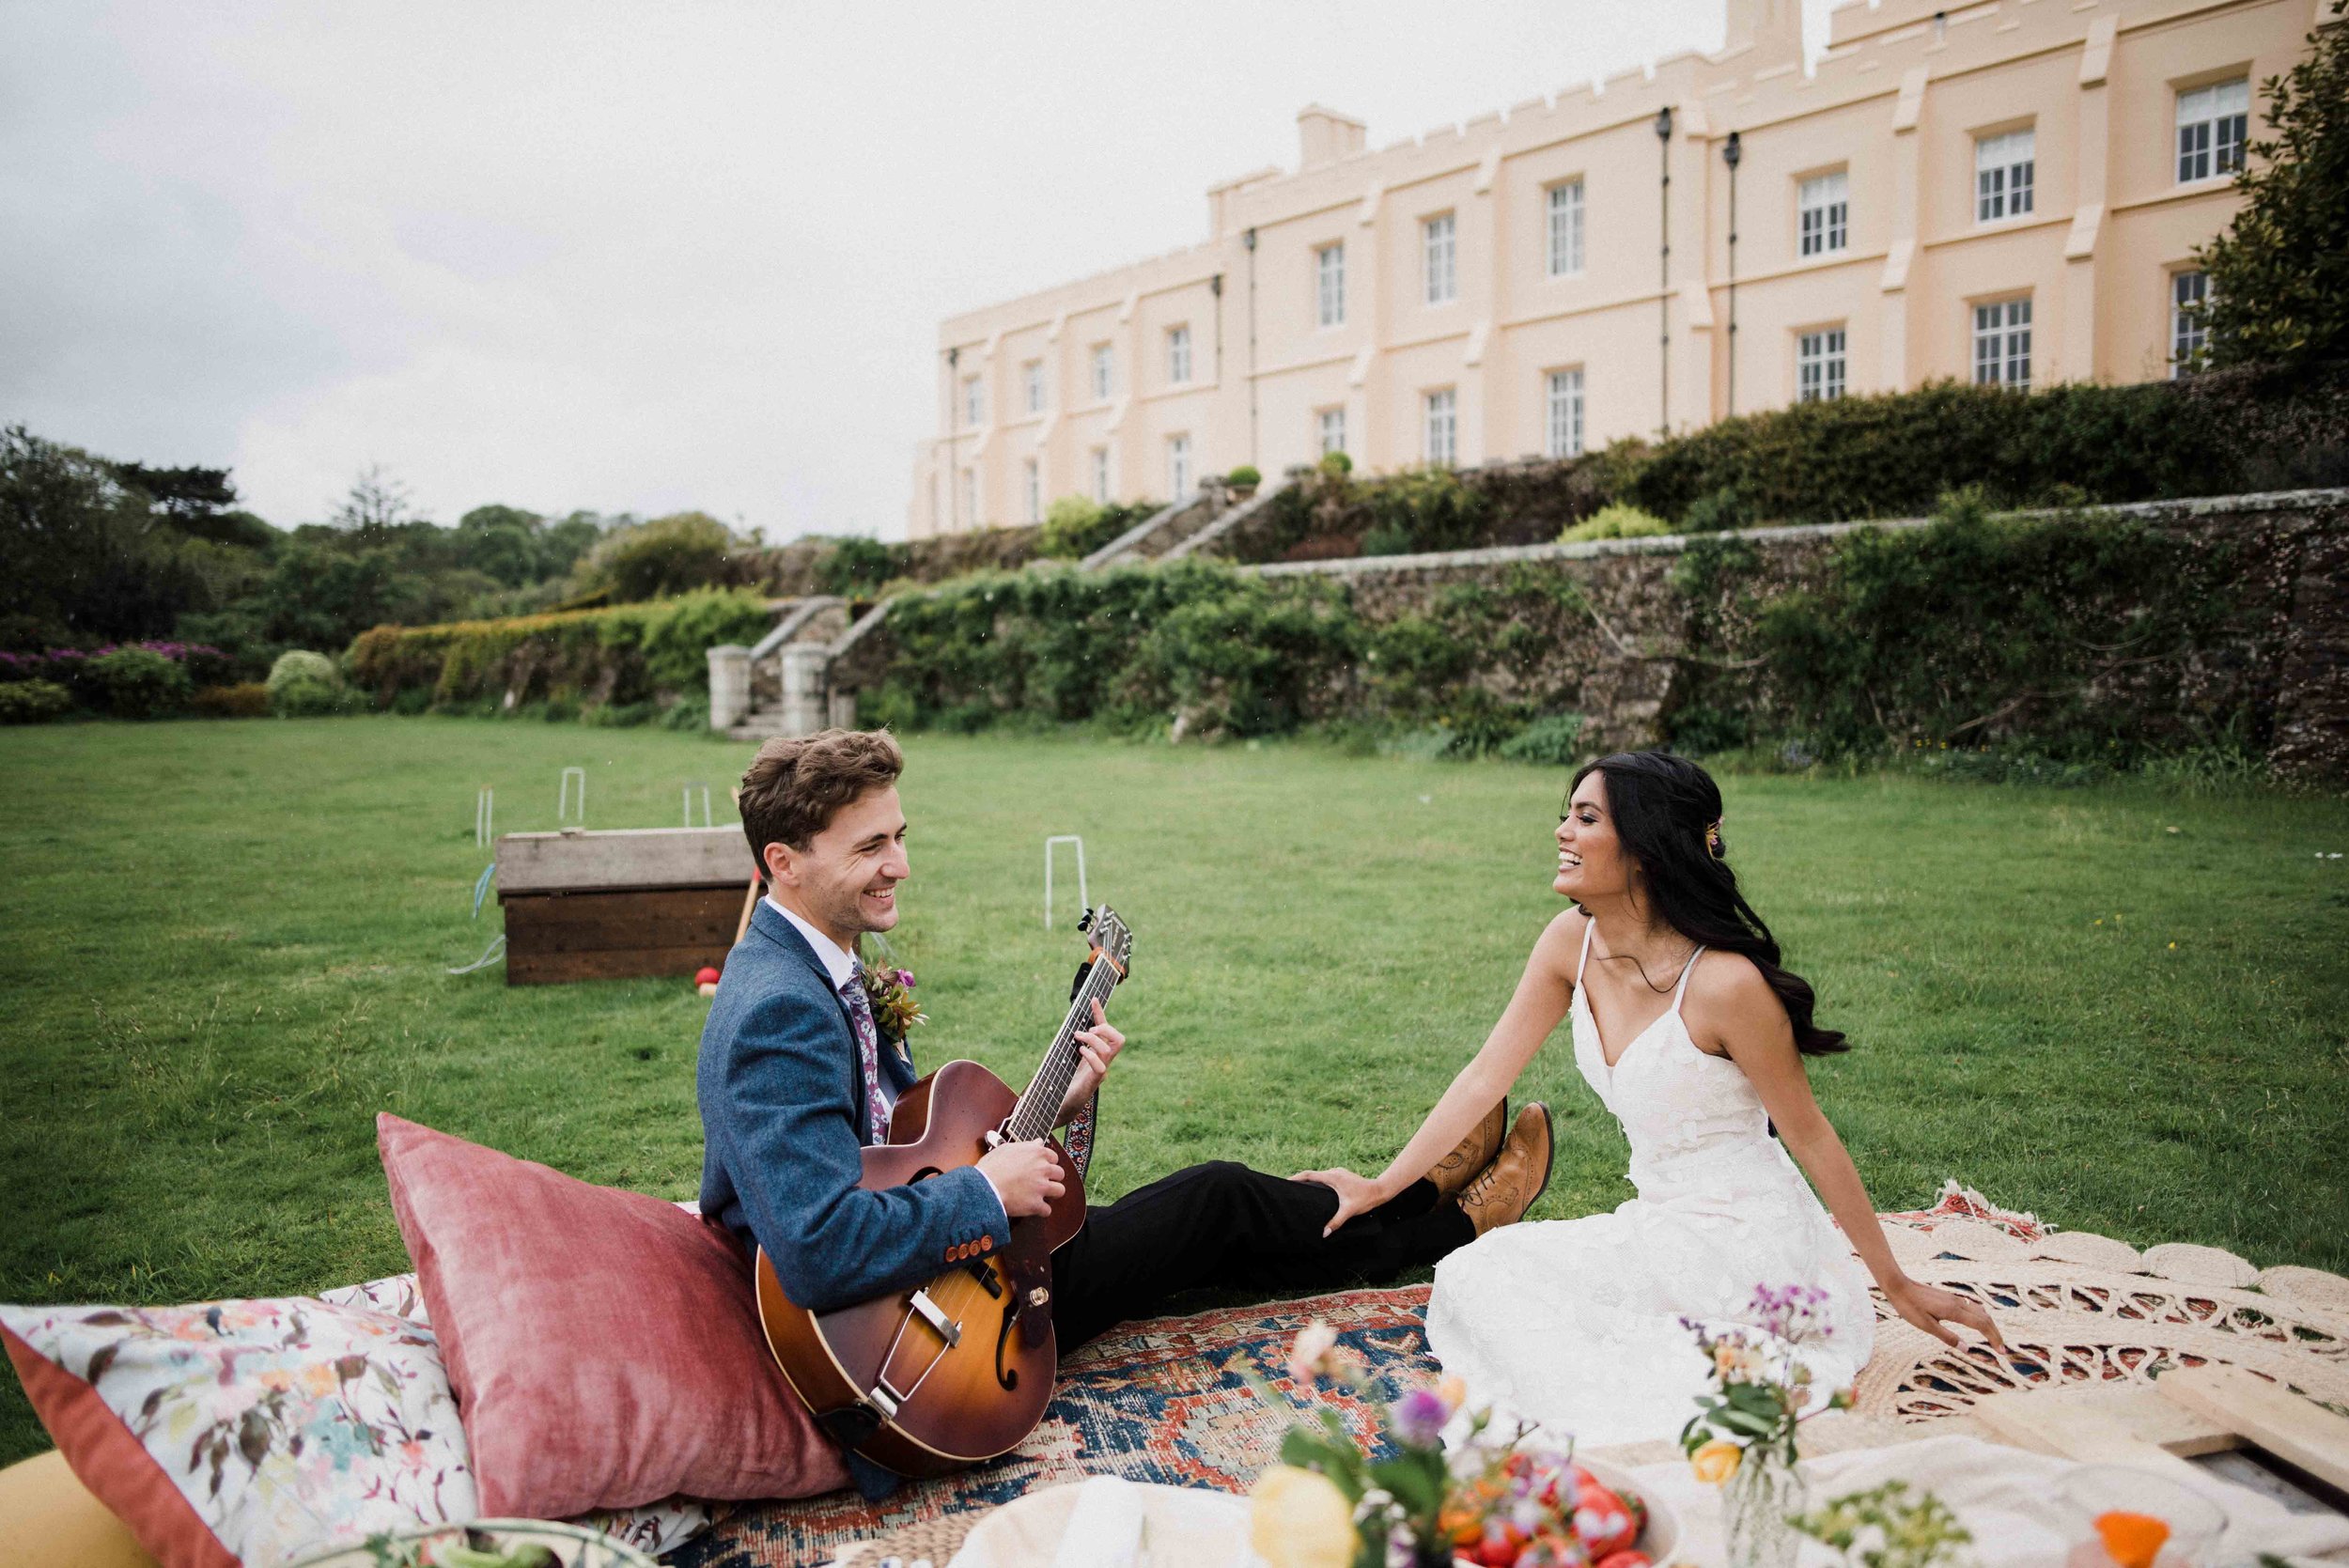 A small, outdoor wedding reception with a picnic and lawn games at Pentillie Castle in Cornwall.jpg